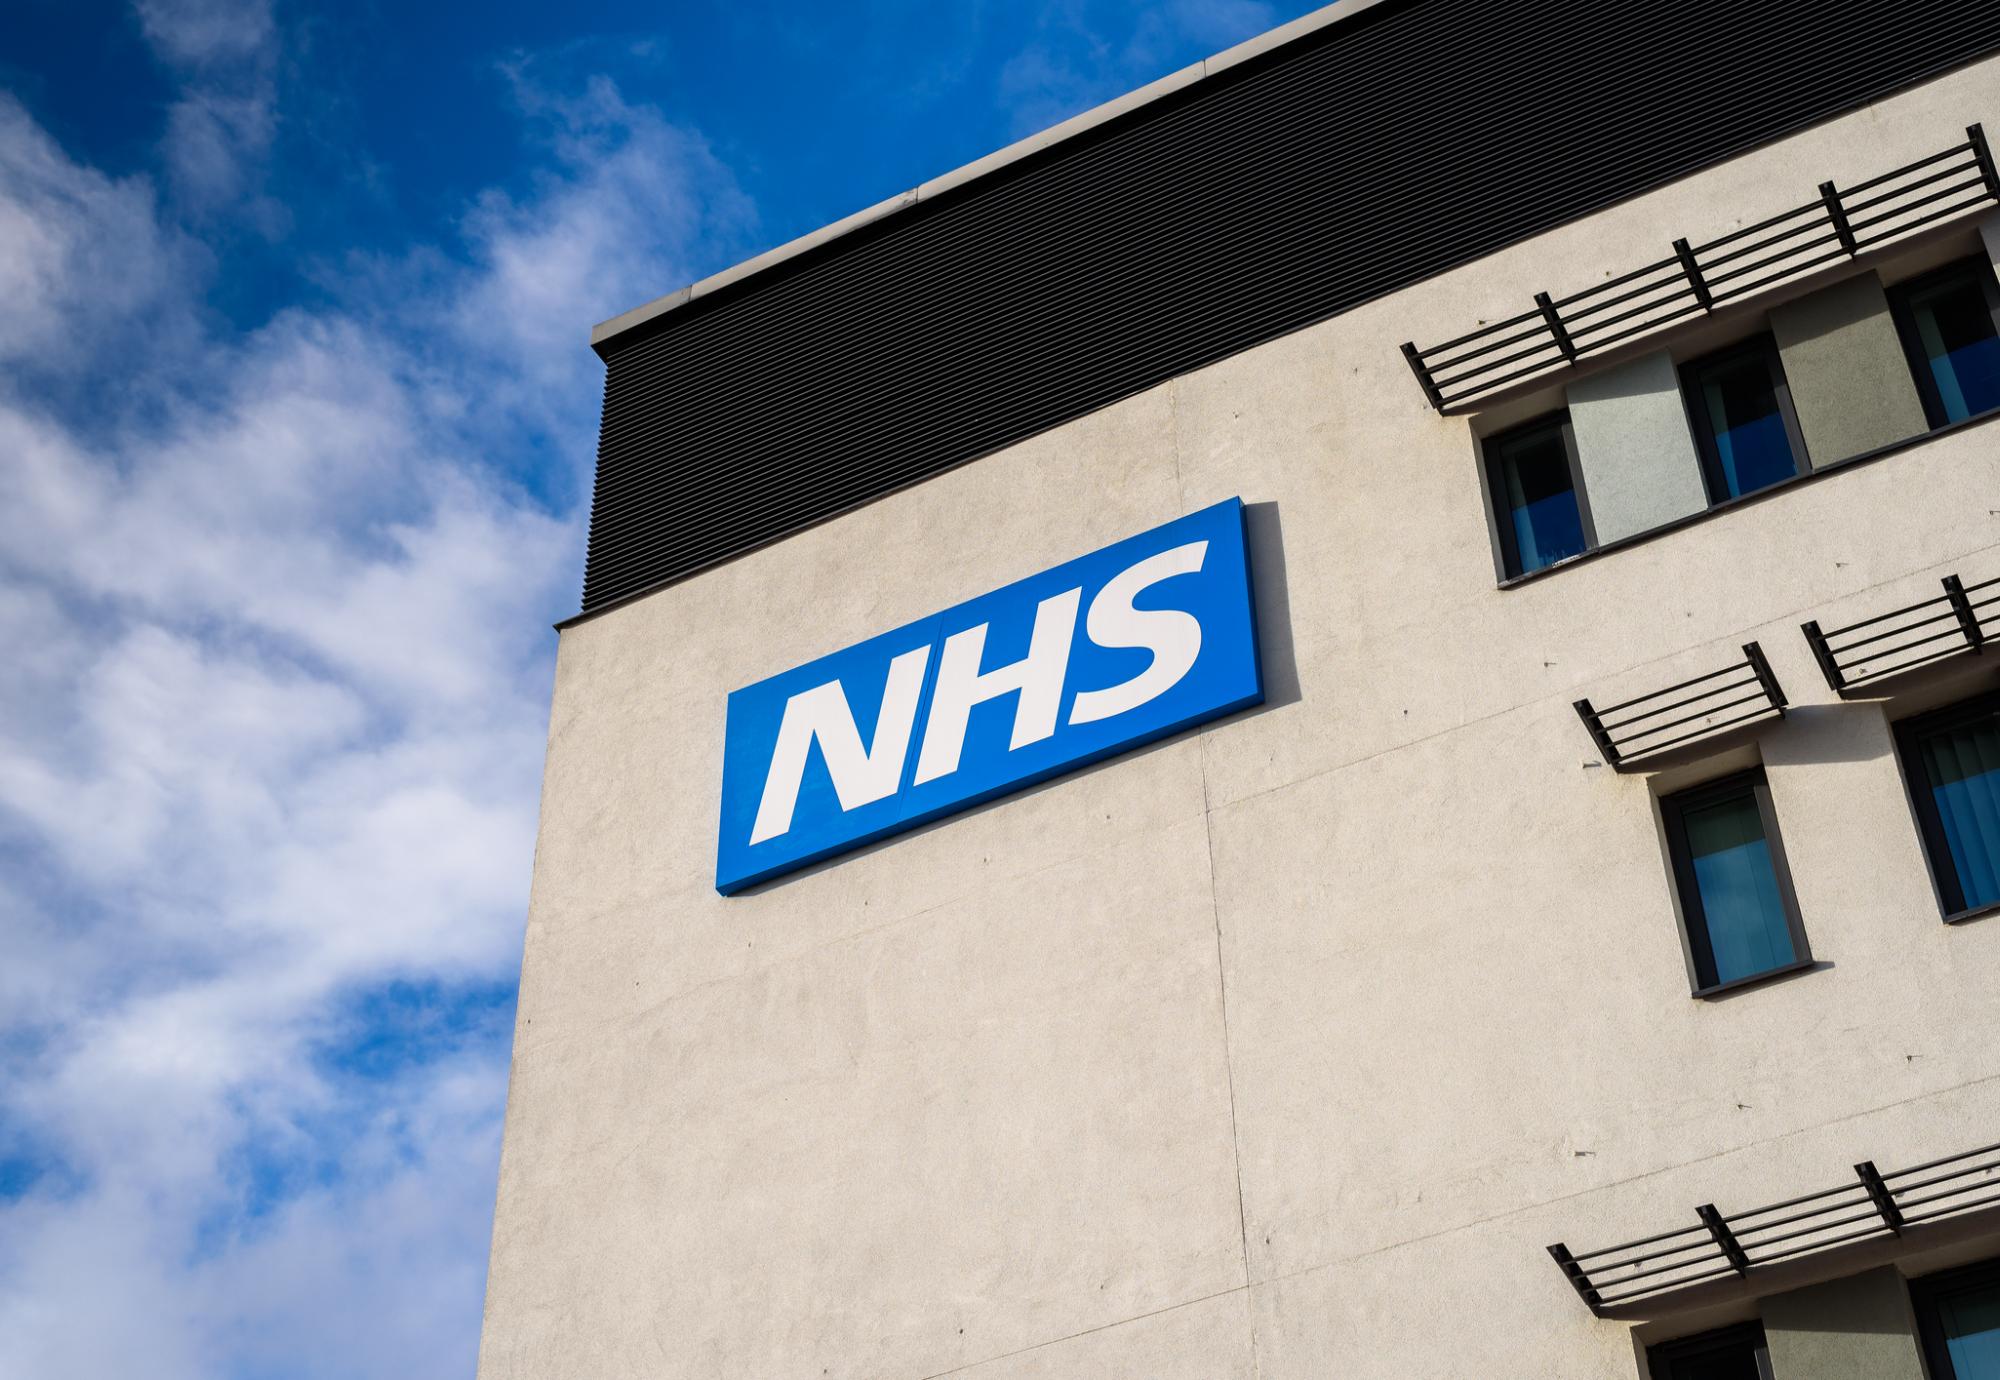 Two-tier healthcare emerging in England, CQC report finds